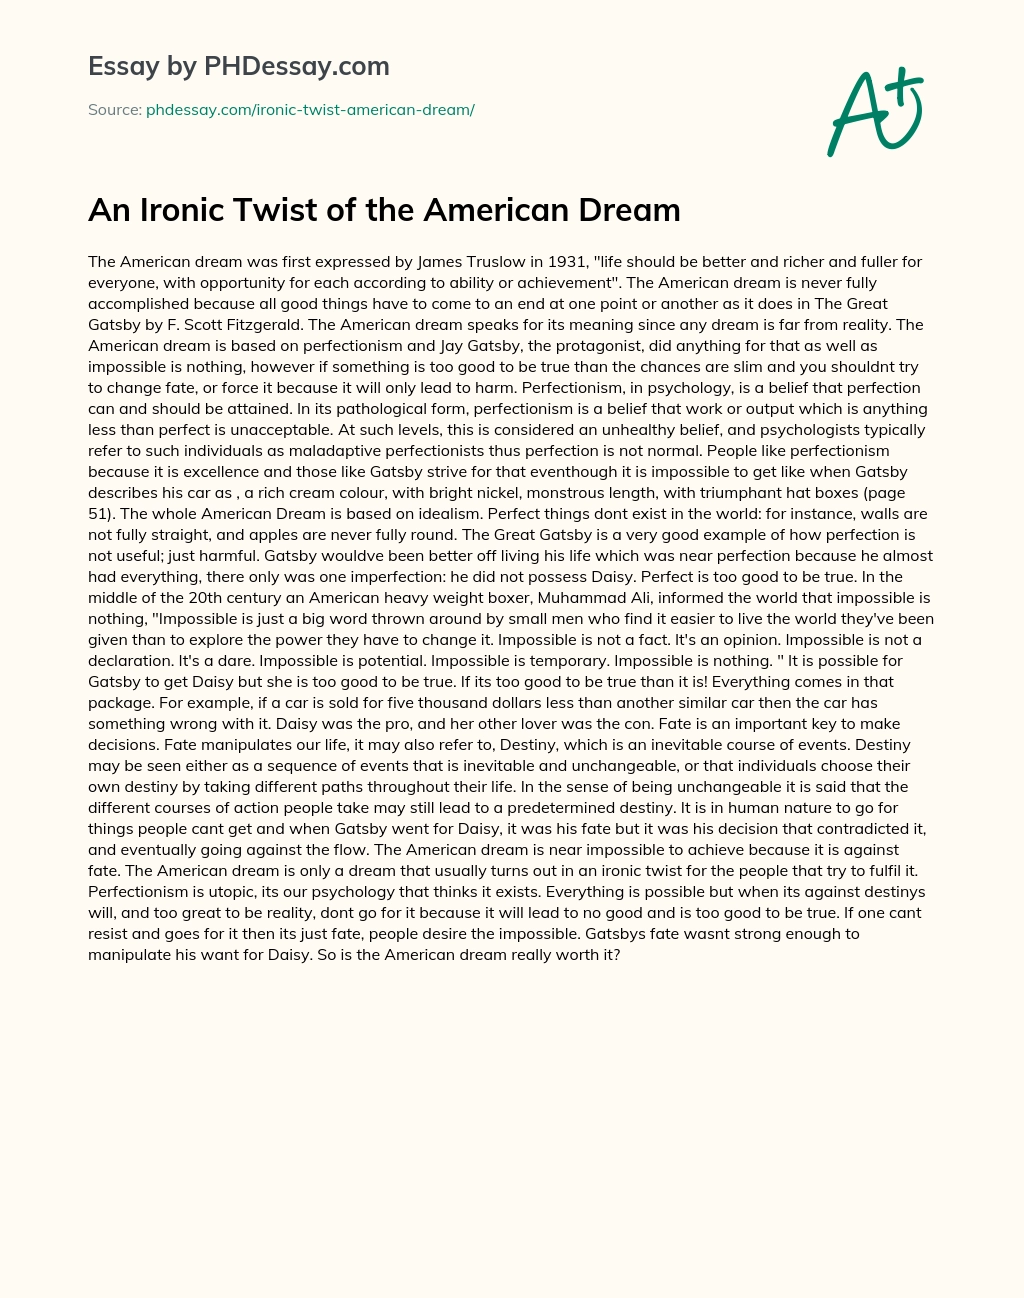 An Ironic Twist of the American Dream essay